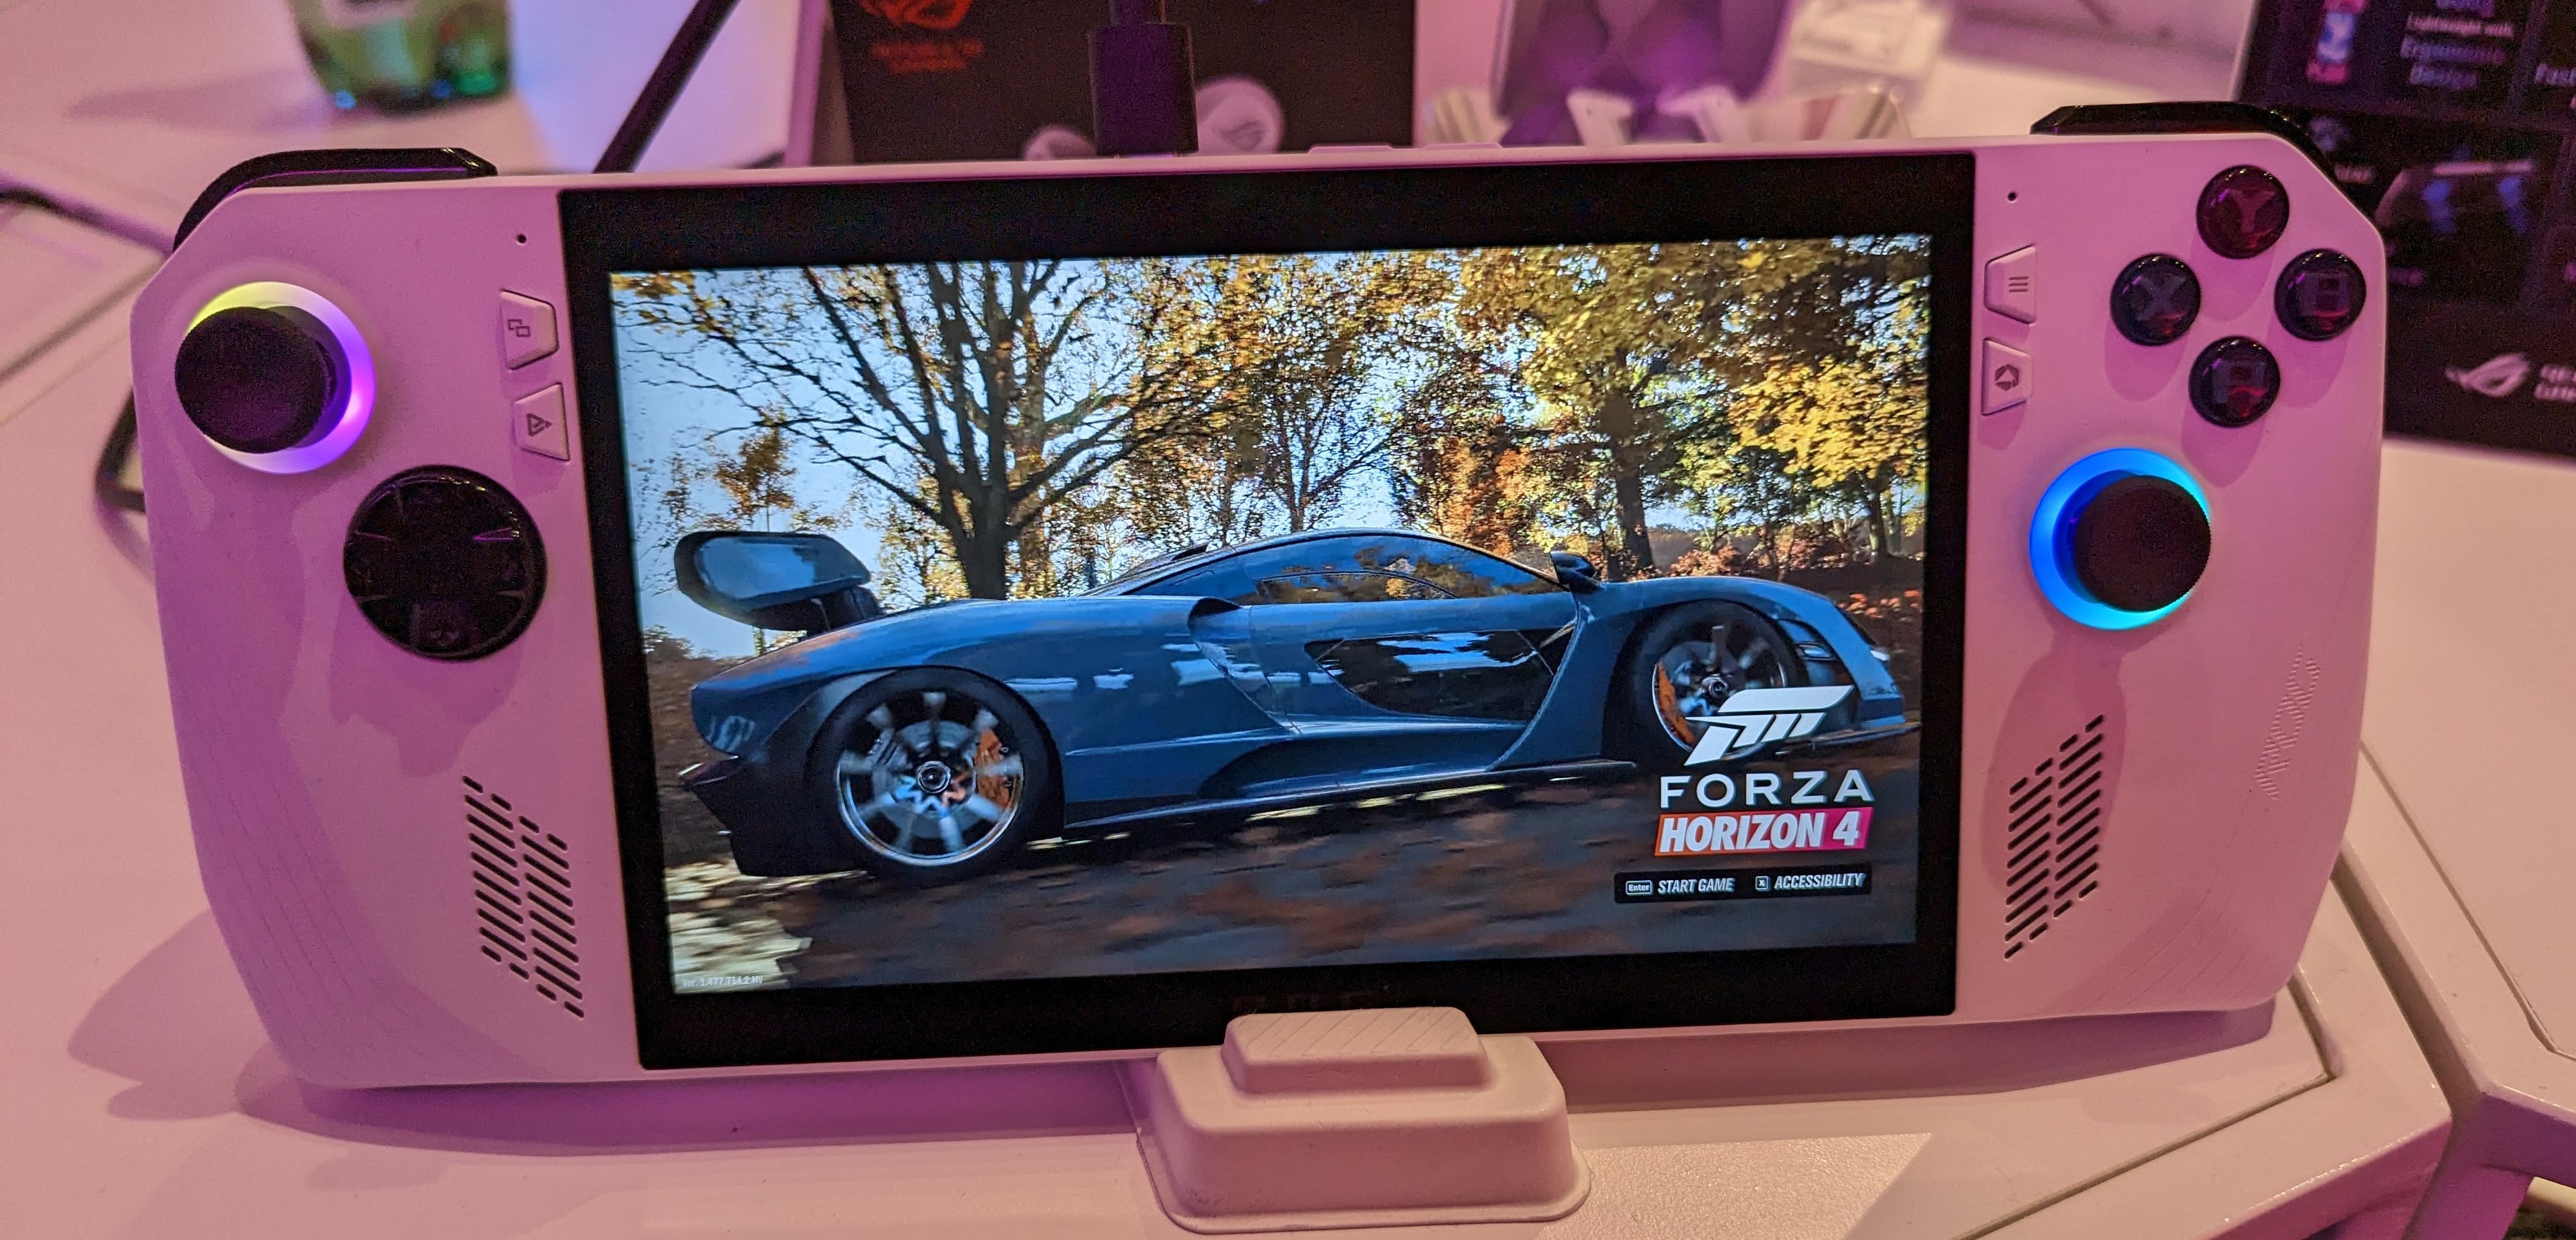 ASUS ROG Ally Hands-On  Can it topple the Steam Deck? – G Style